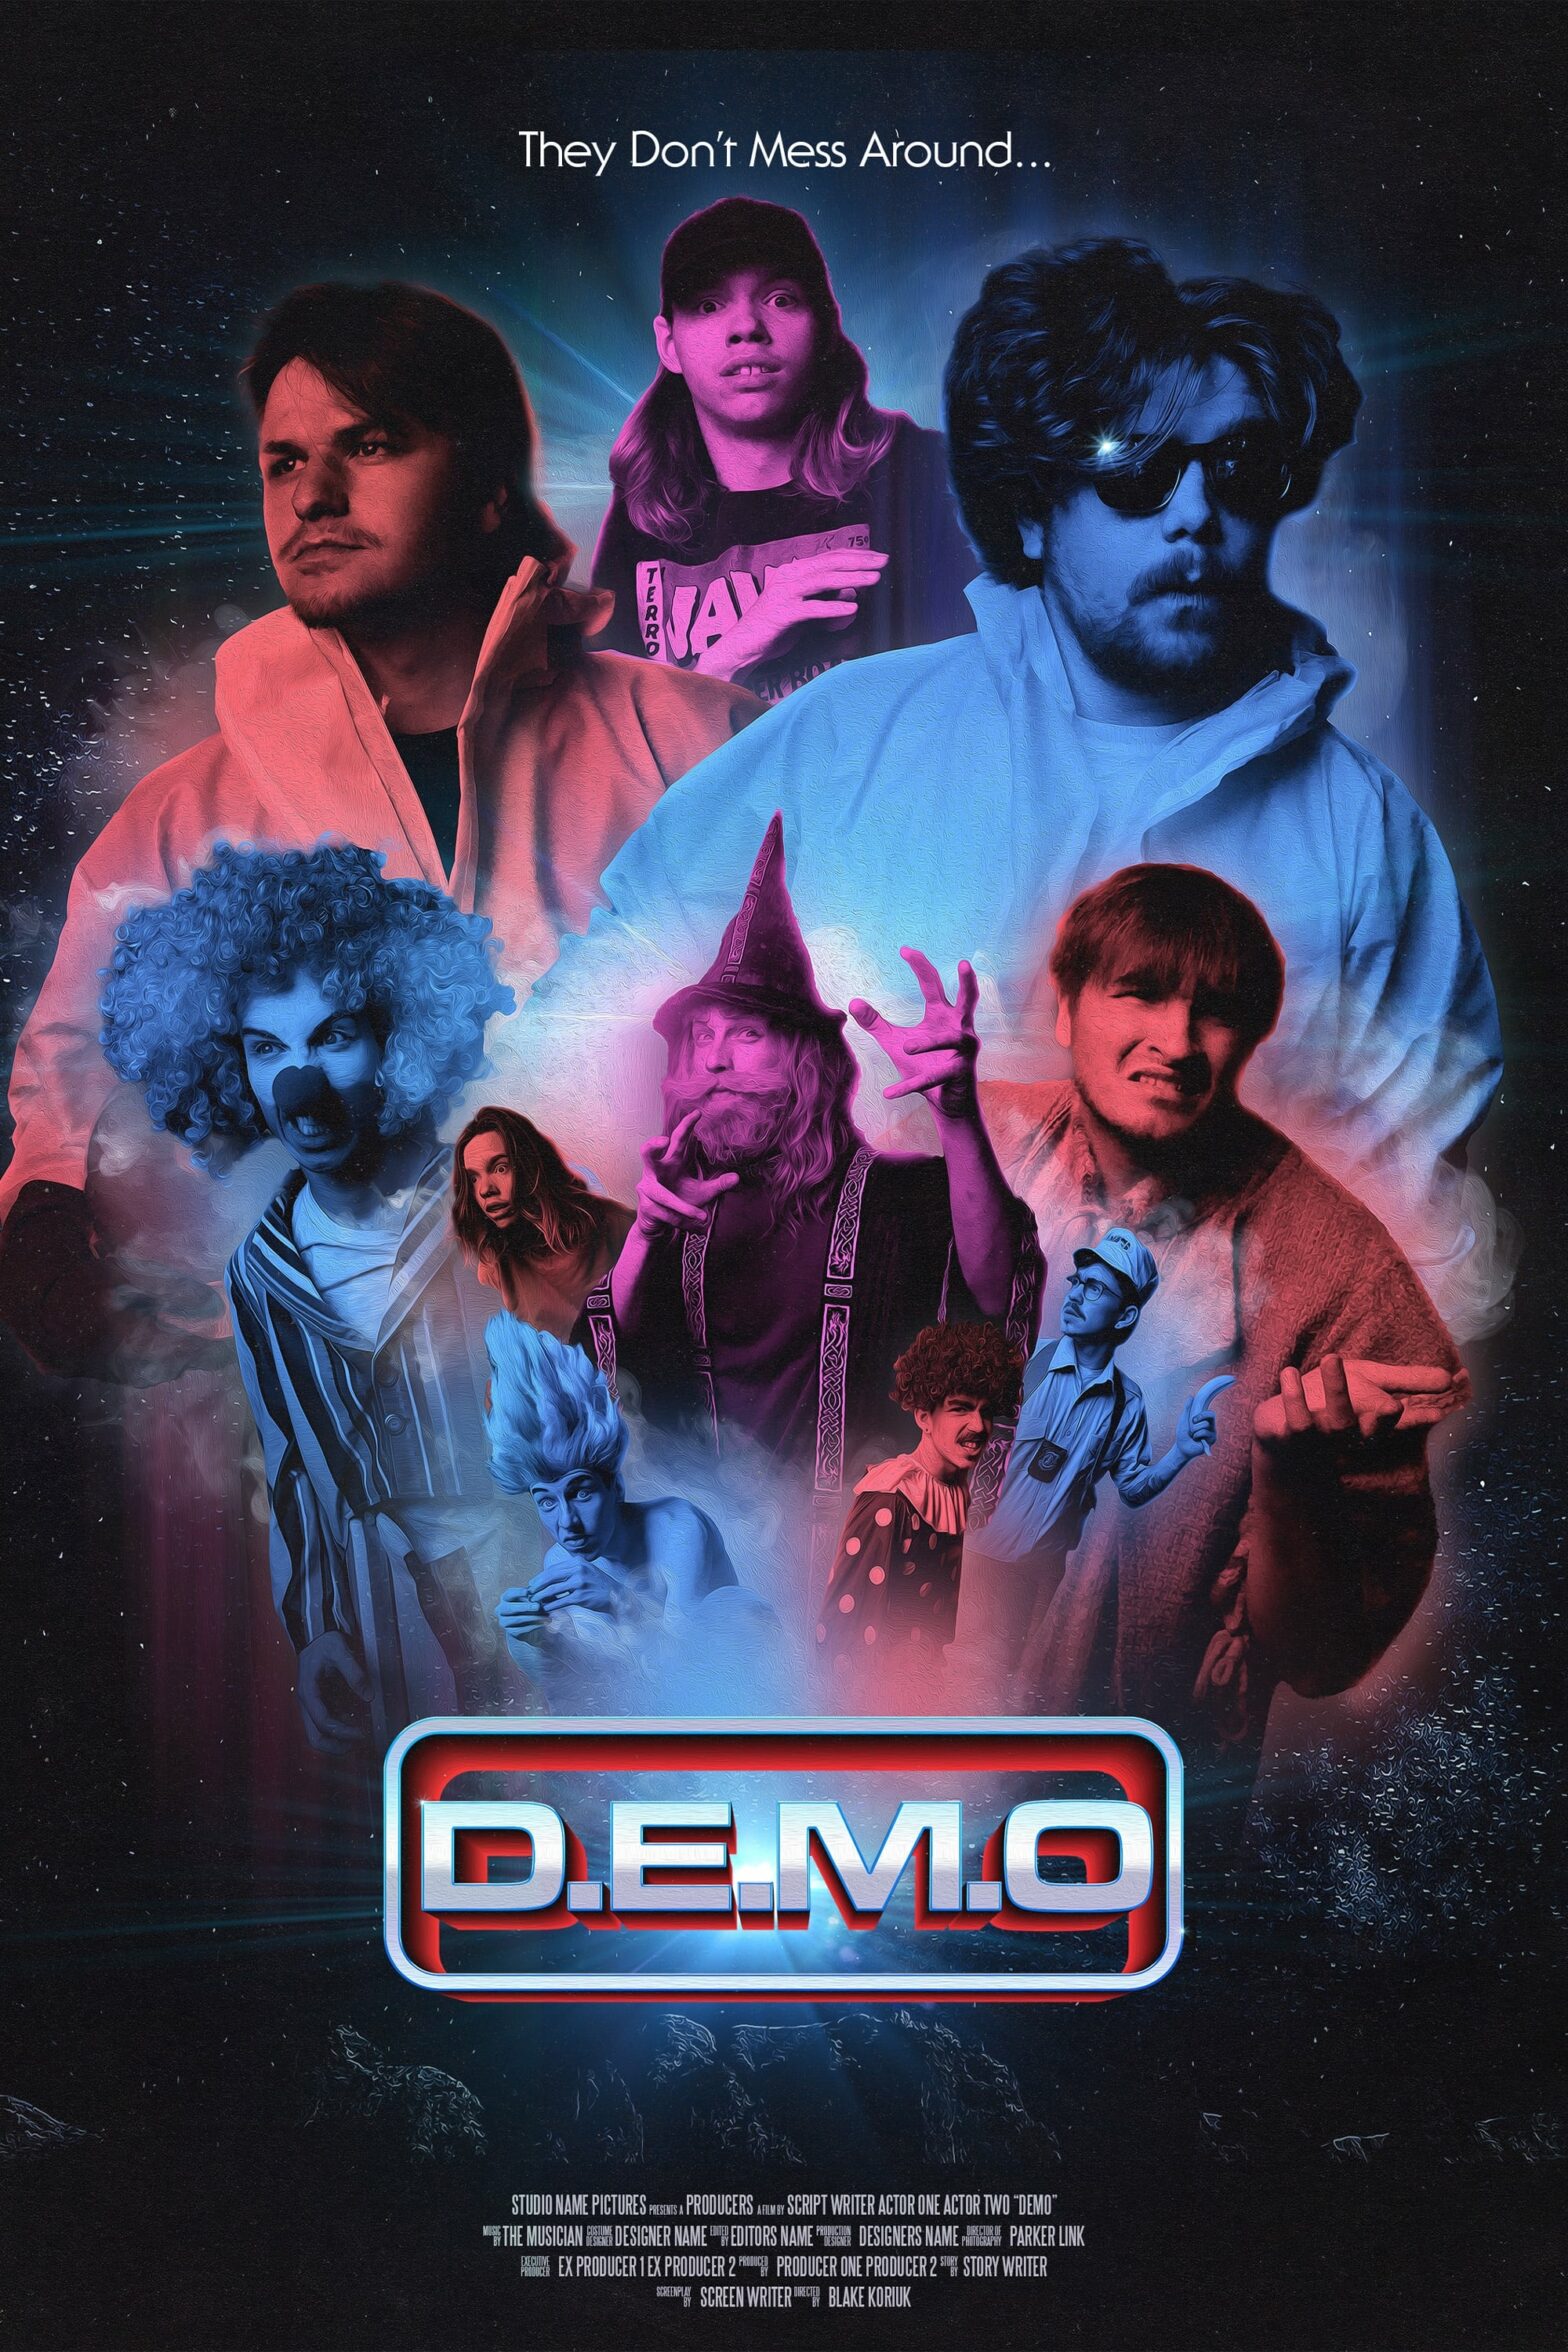 Poster for the movie "DEMO"